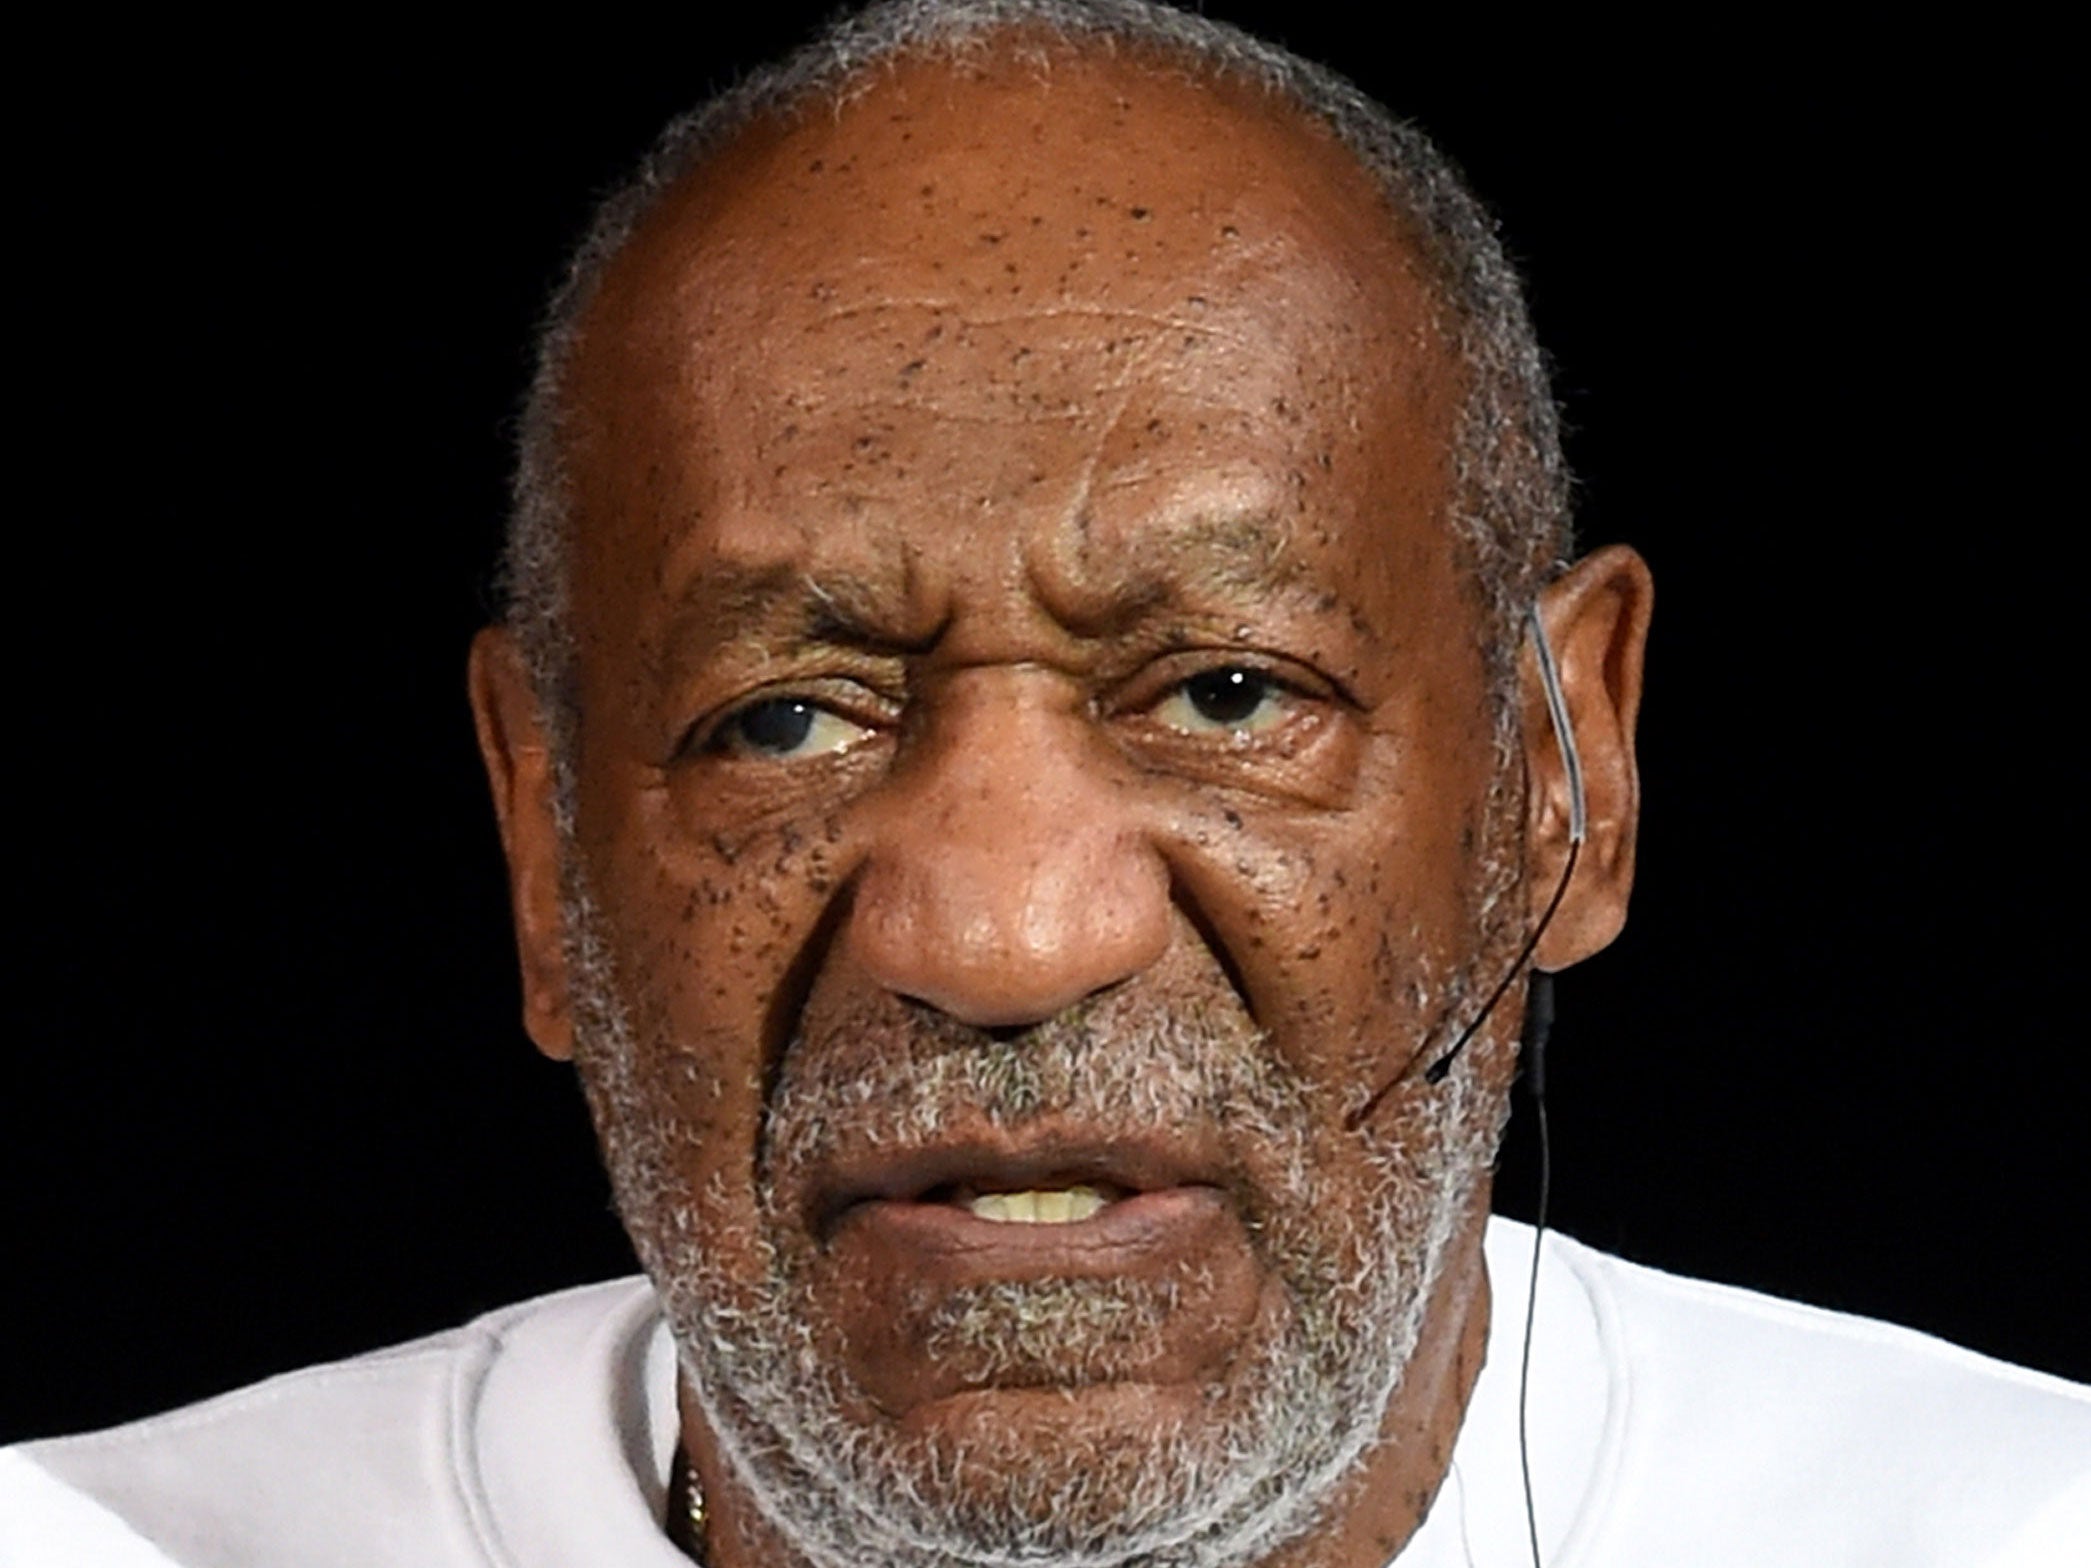 Bill Cosby, who has been accused of committing sexual assault